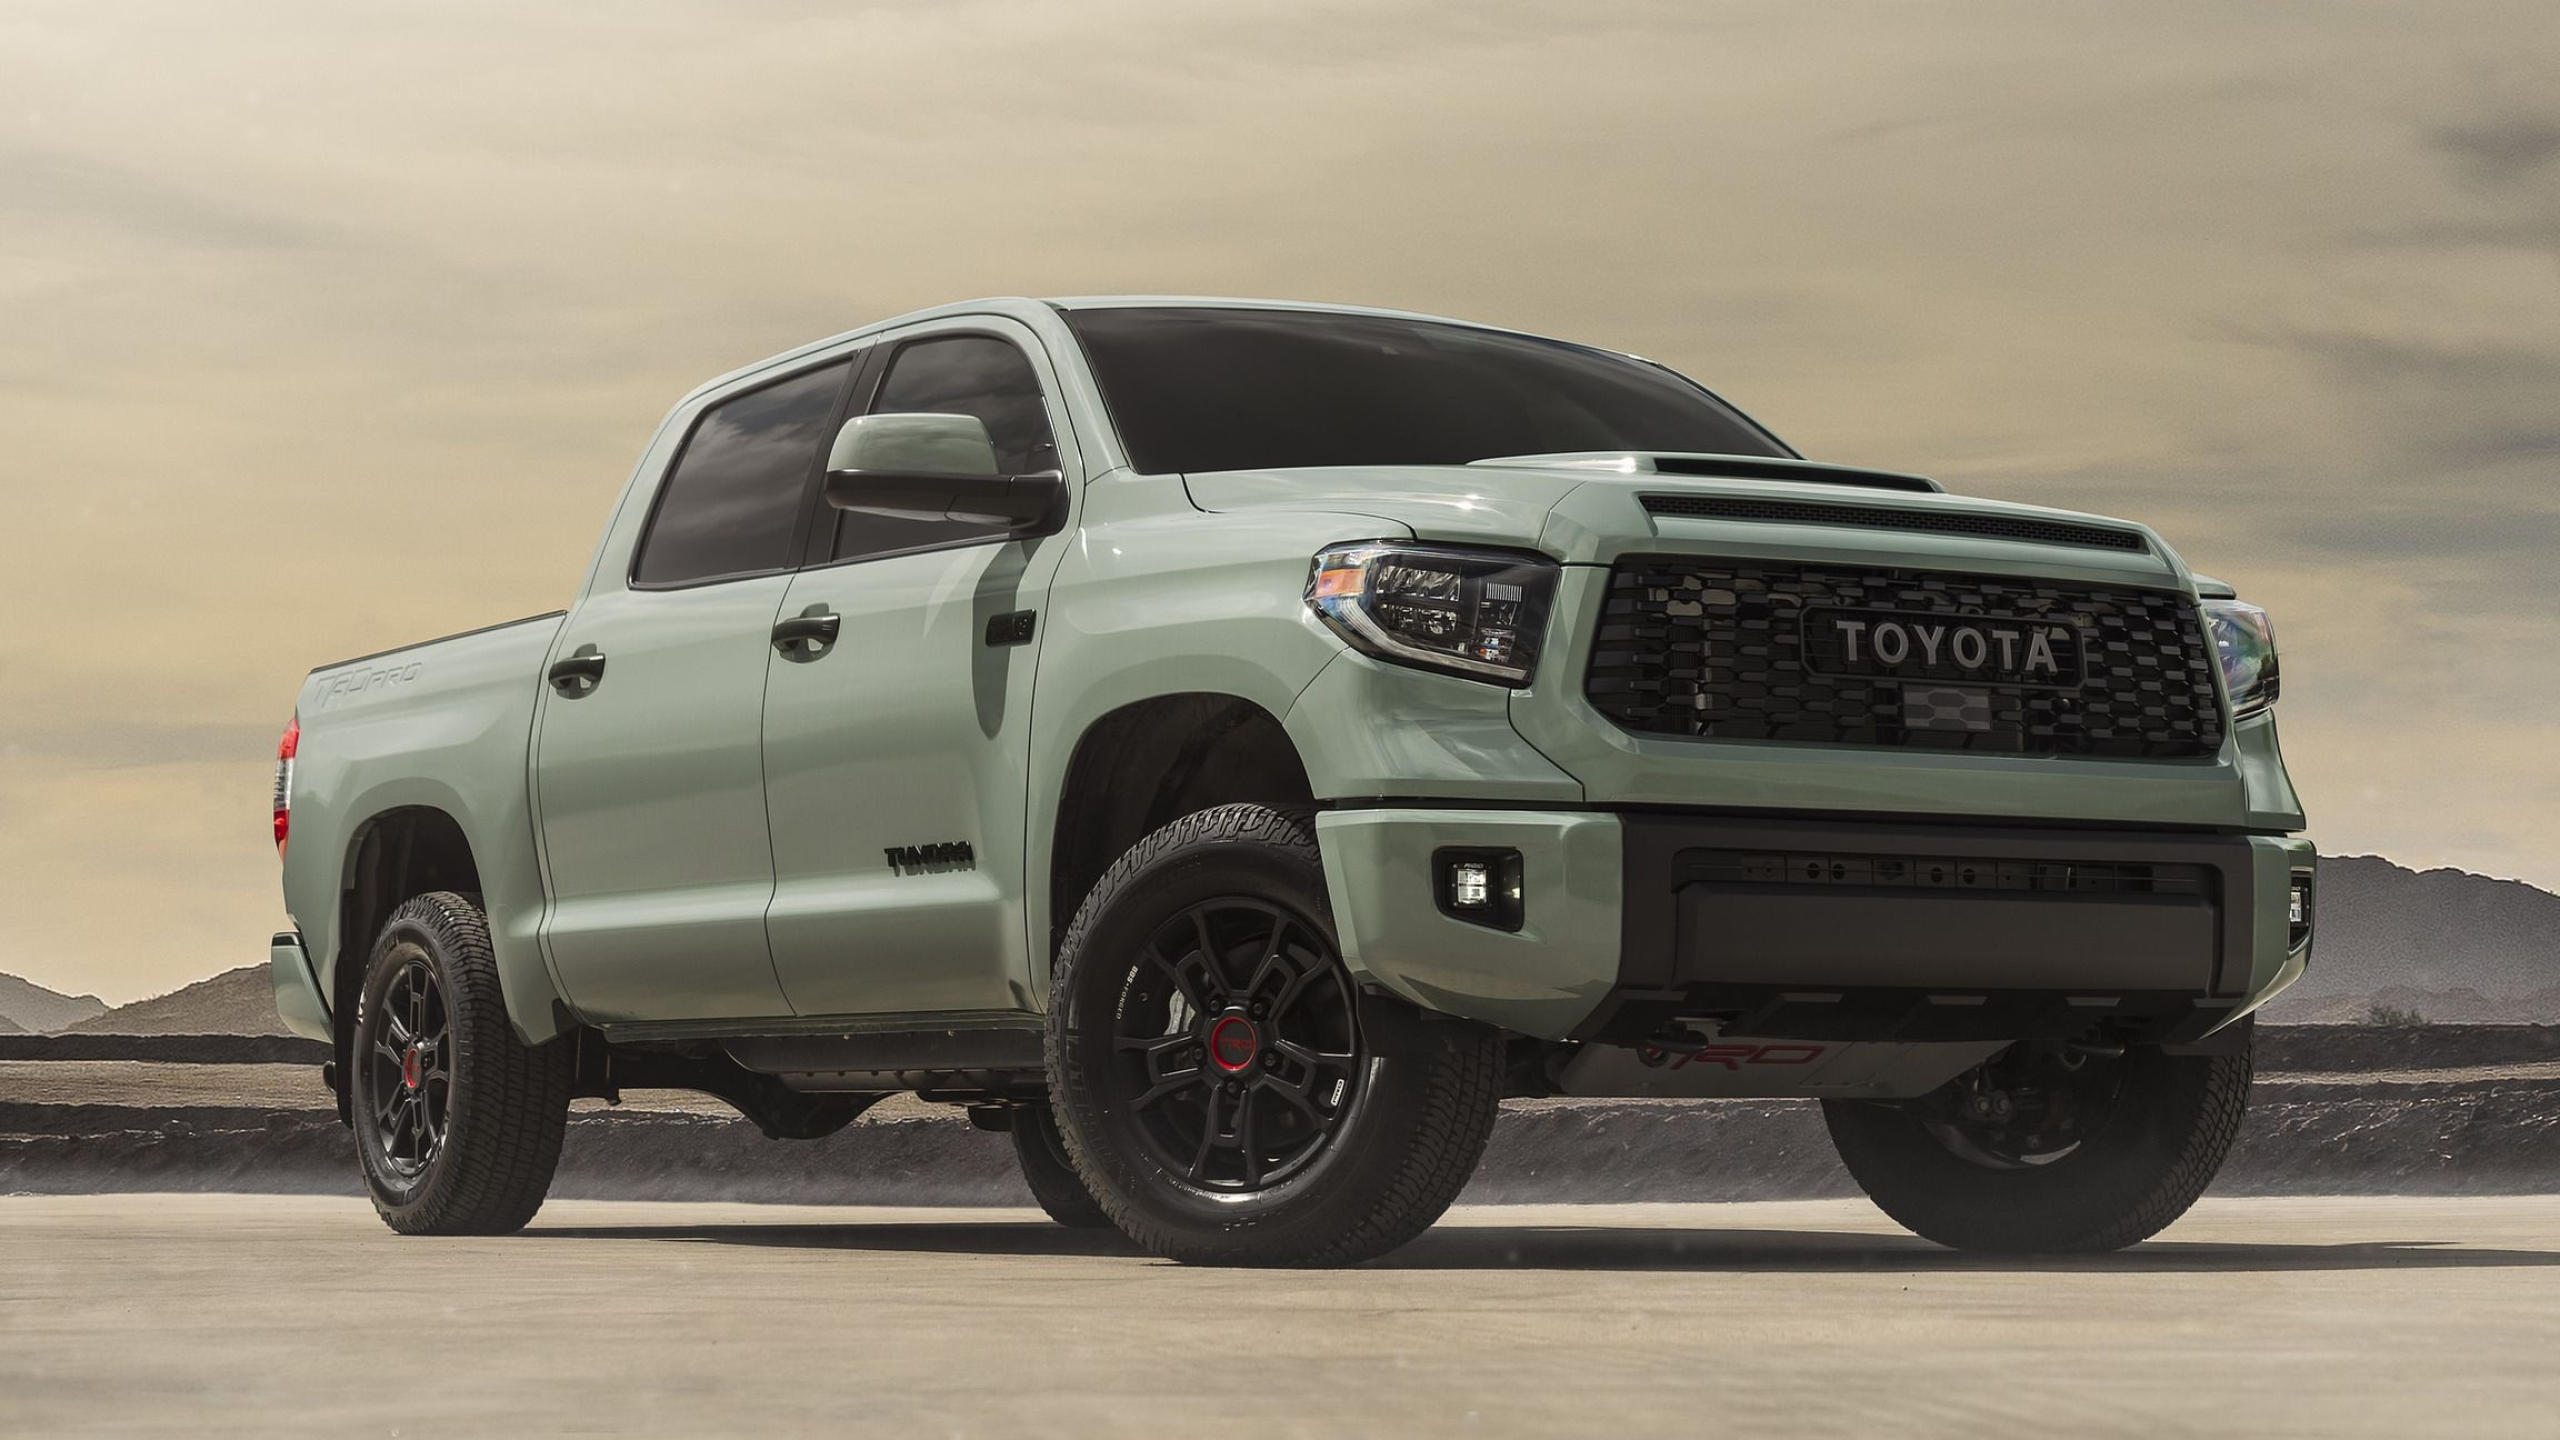 Toyota Tundra, HD wallpapers, Top car backgrounds, Auto industry, 2560x1440 HD Desktop